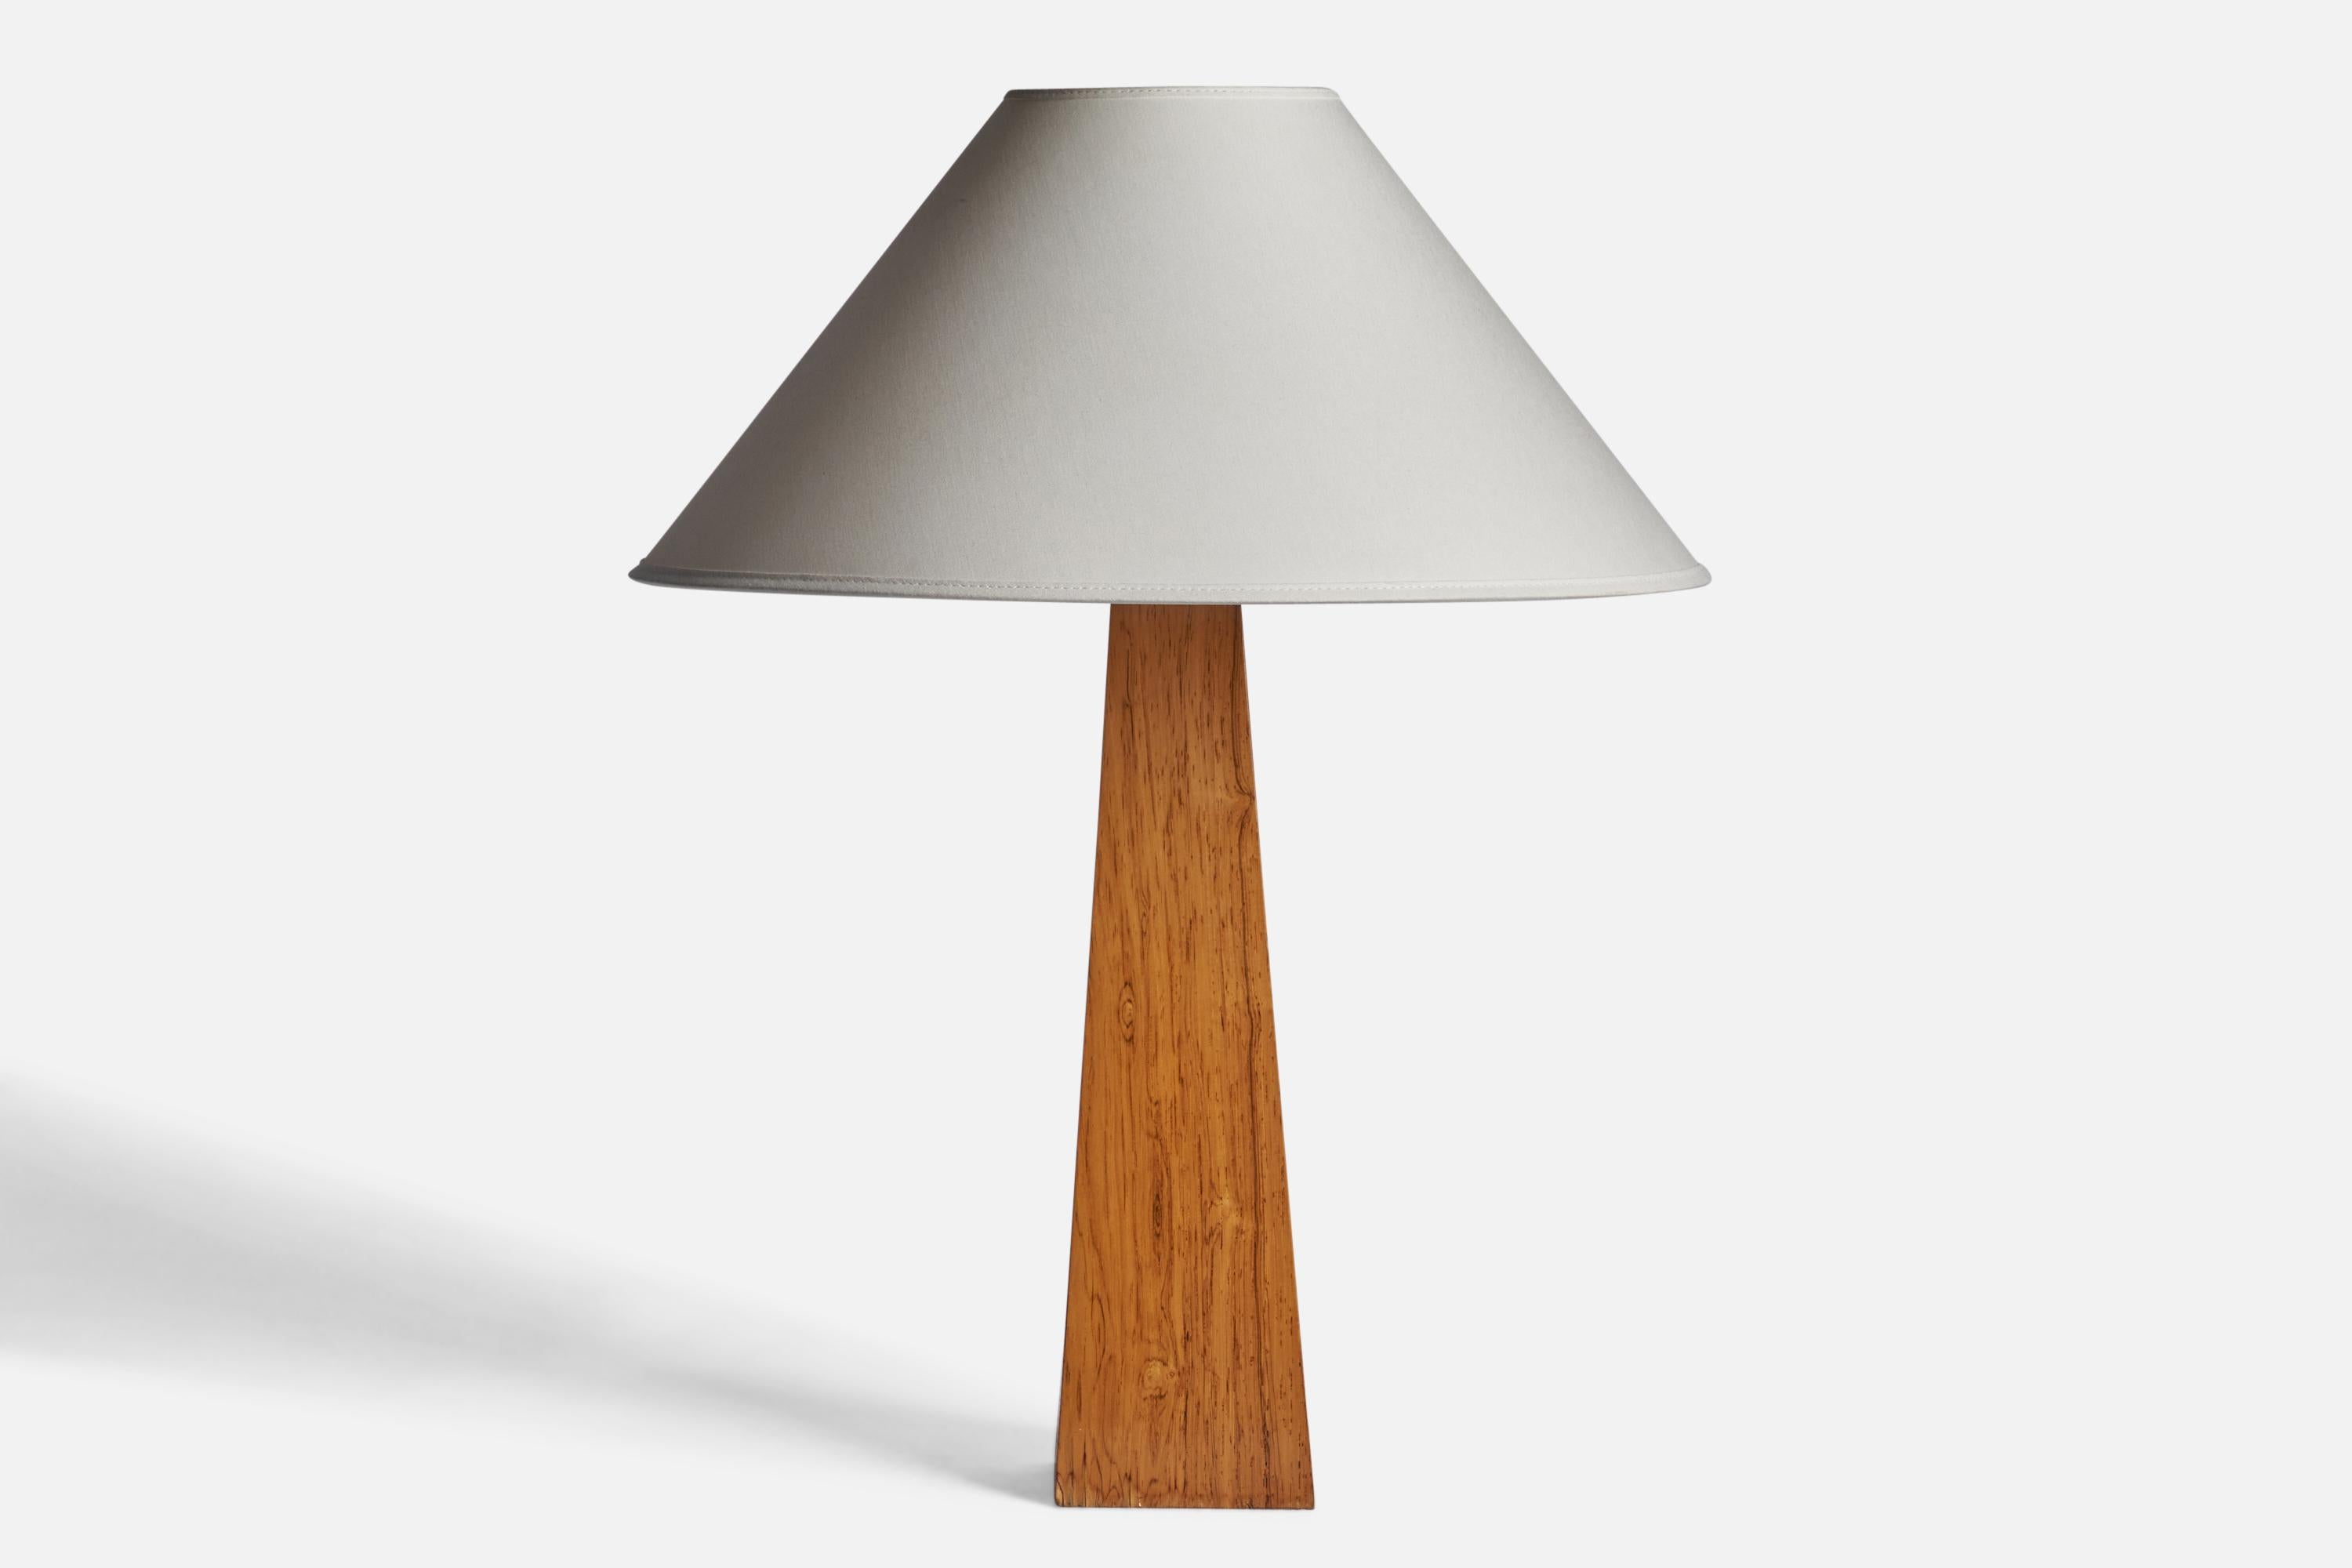 A birch table lamp designed and produced in Sweden, c. 1950s.

Dimensions of Lamp (inches): 15.95” H x 3.75” Diameter
Dimensions of Shade (inches): 4.5” Top Diameter x 16” Bottom Diameter x 7.25” H
Dimensions of Lamp with Shade (inches): 20.85” H x